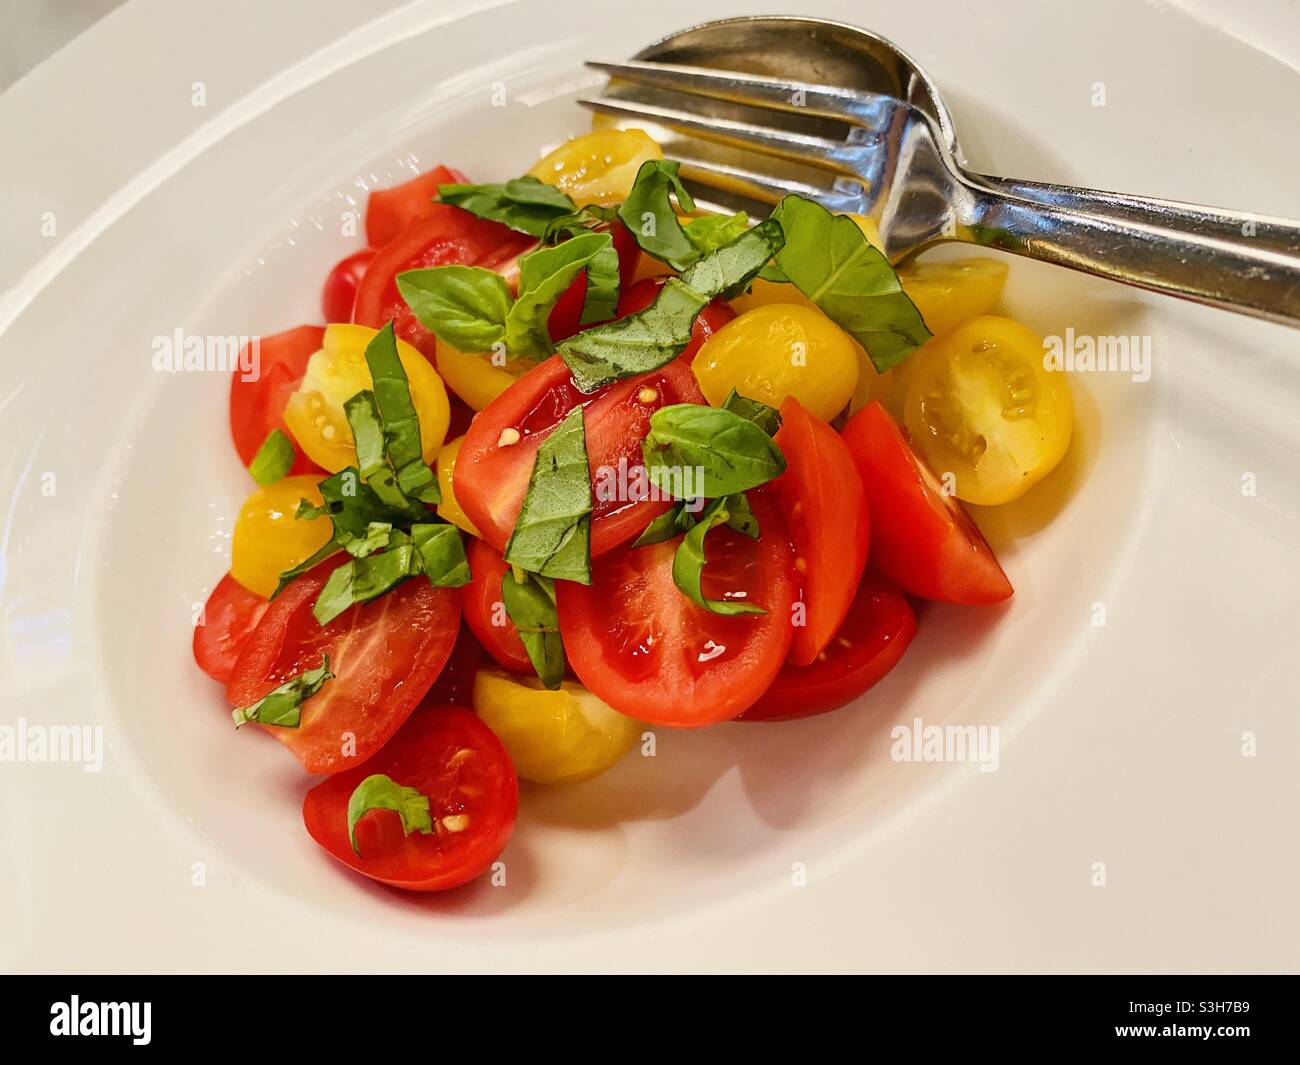 Plate of fresh farm-to-table tomatoes served with basil and olive oil in Milan, Italy Stock Photo